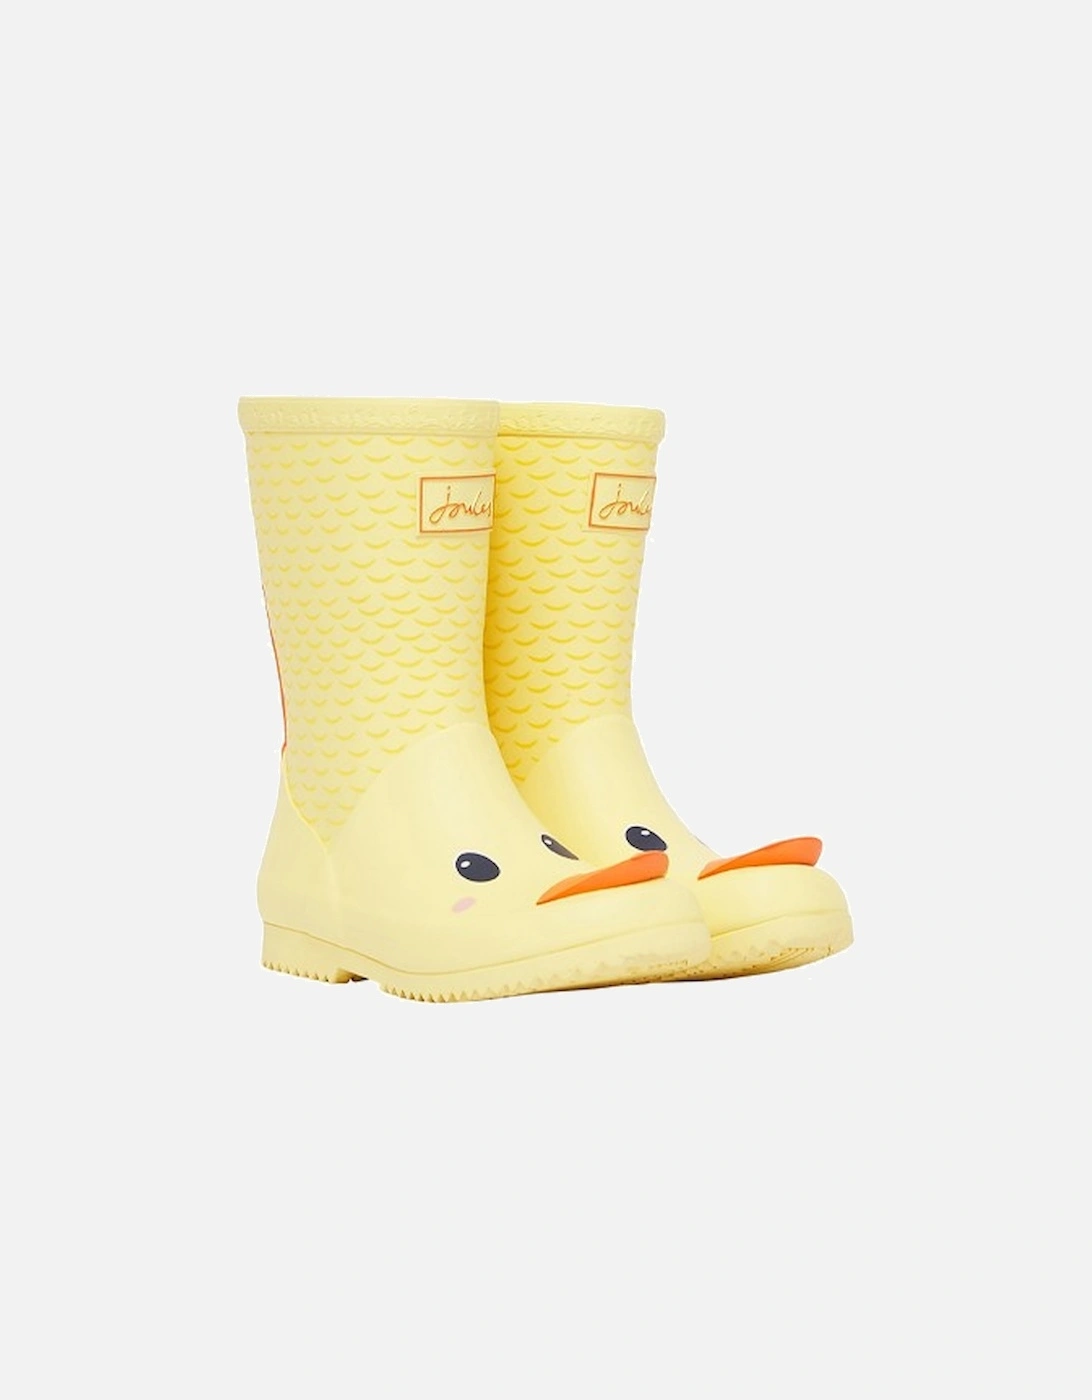 JNR Roll Up Wellies Yellow Duck, 7 of 6